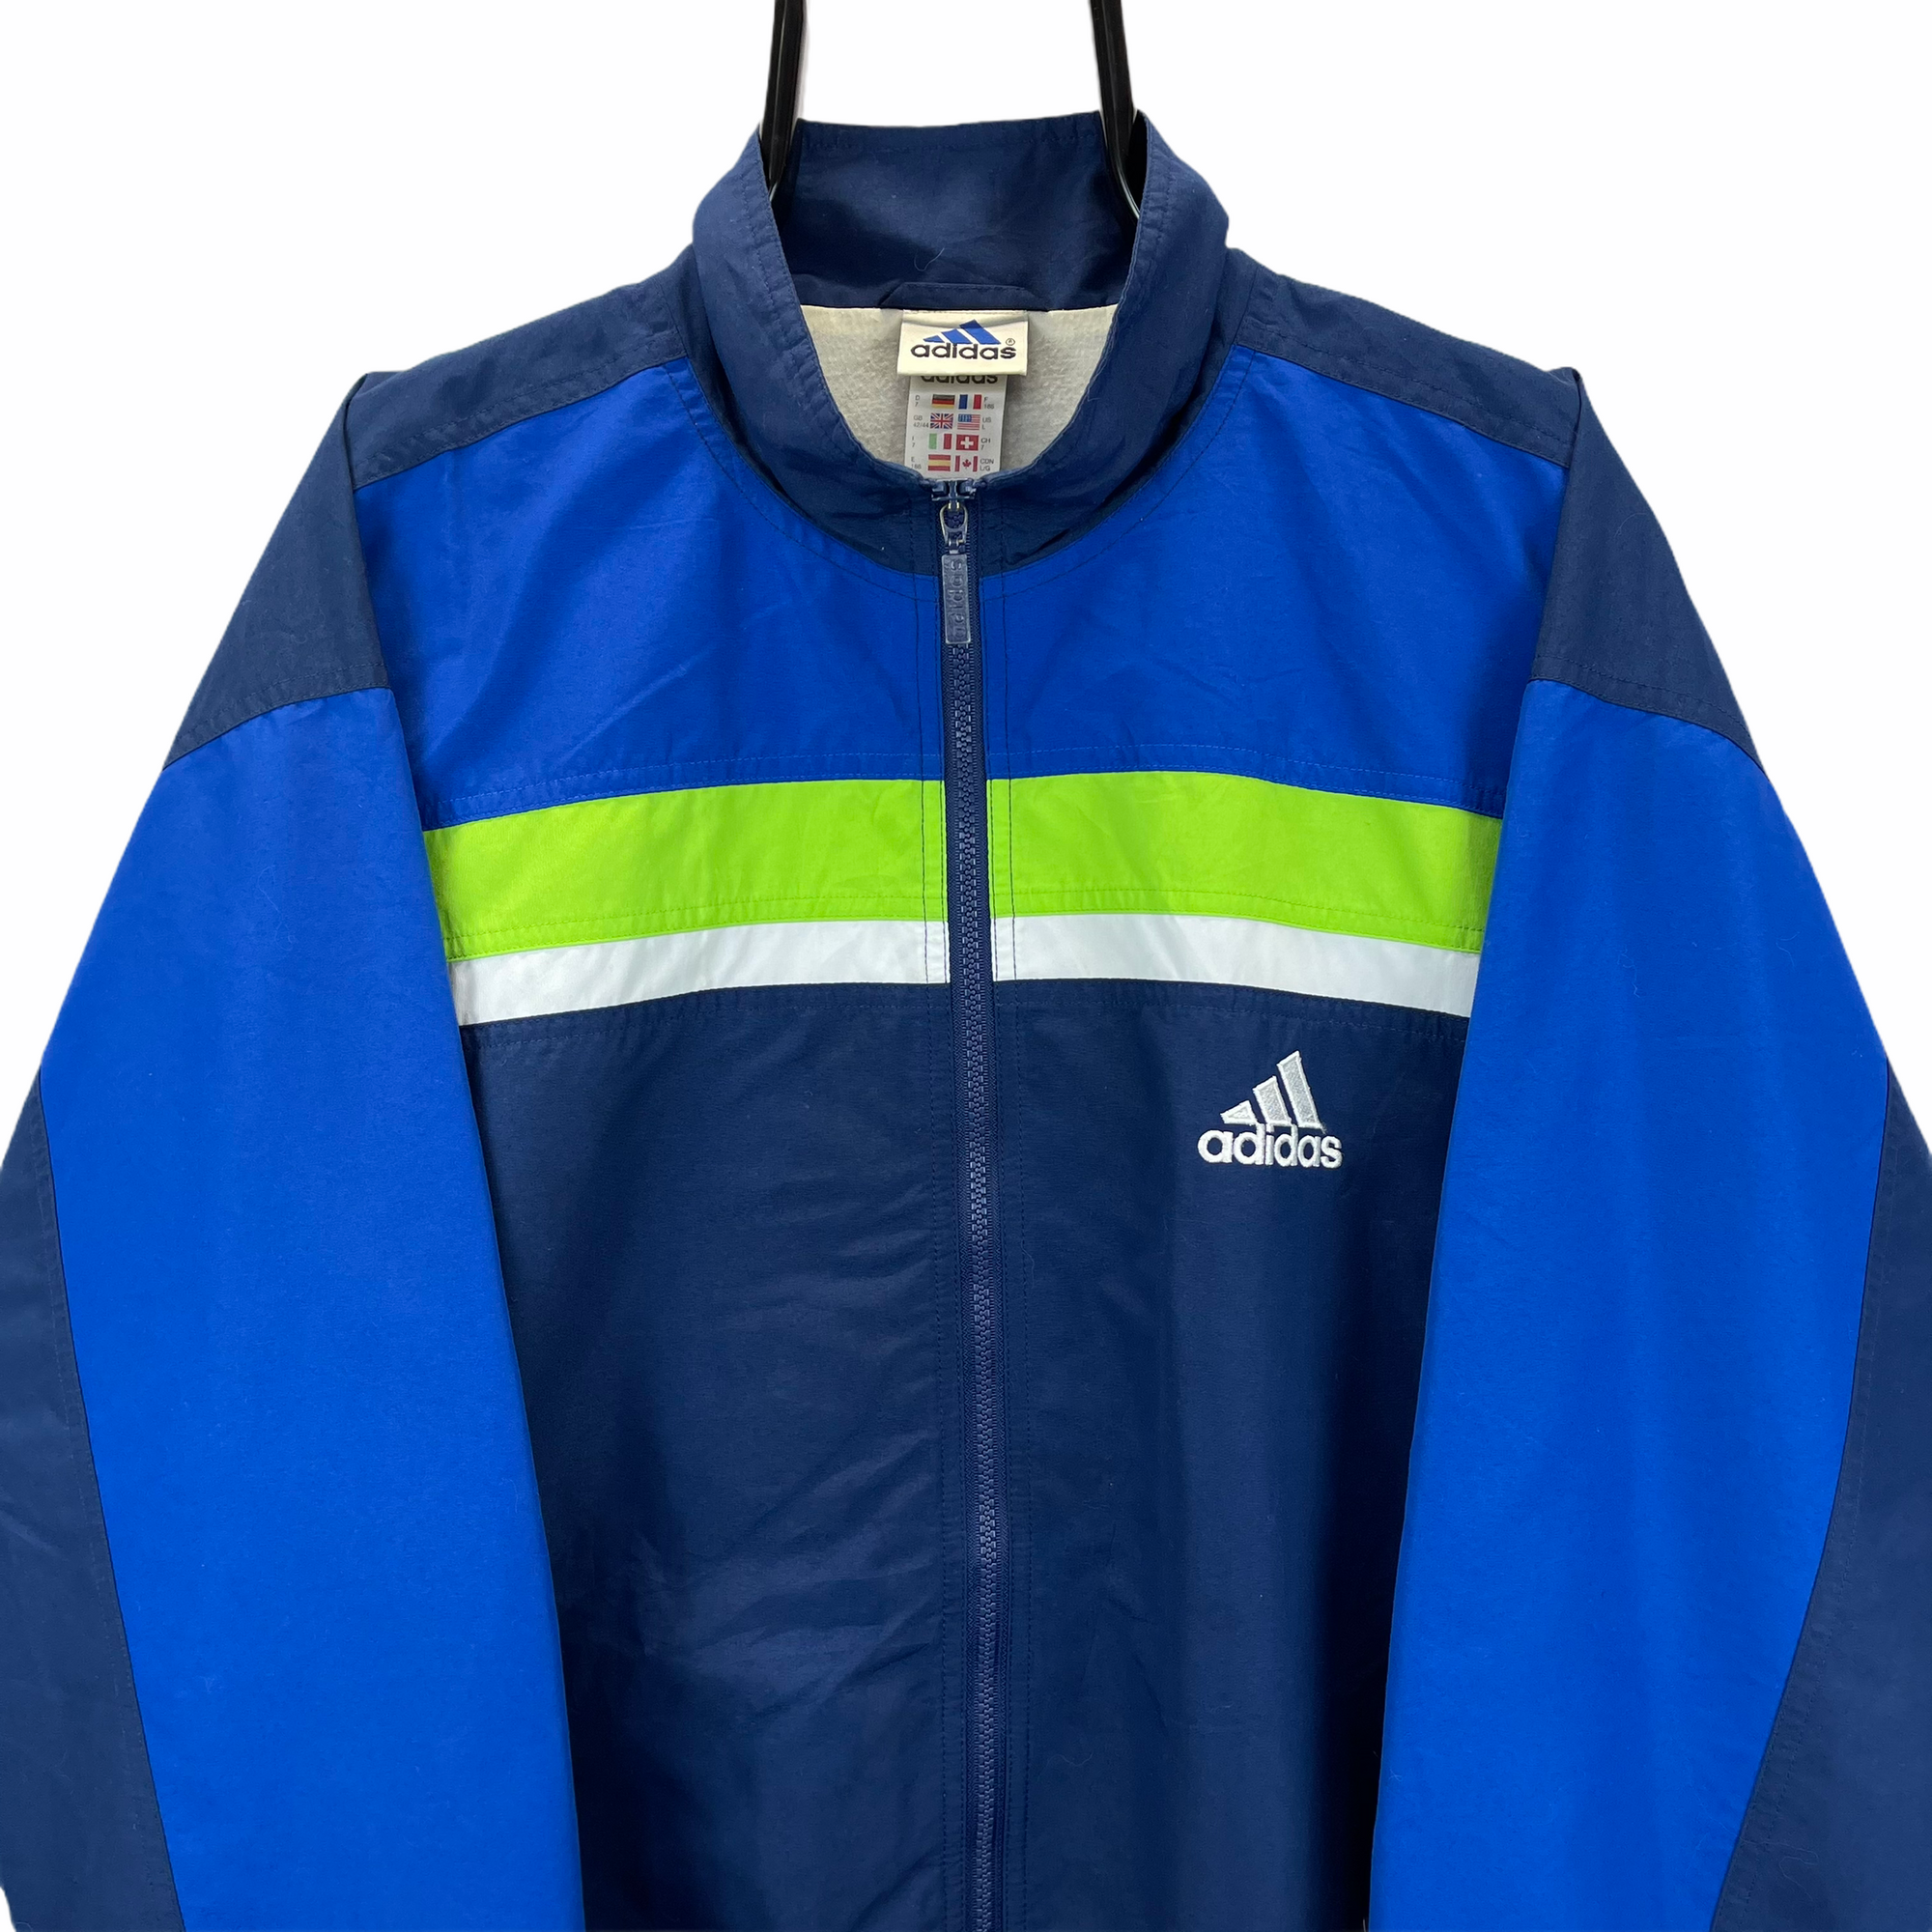 VINTAGE 90S ADIDAS TRACK JACKET IN BLUE, GREEN & WHITE - MEN'S LARGE/WOMEN'S XL